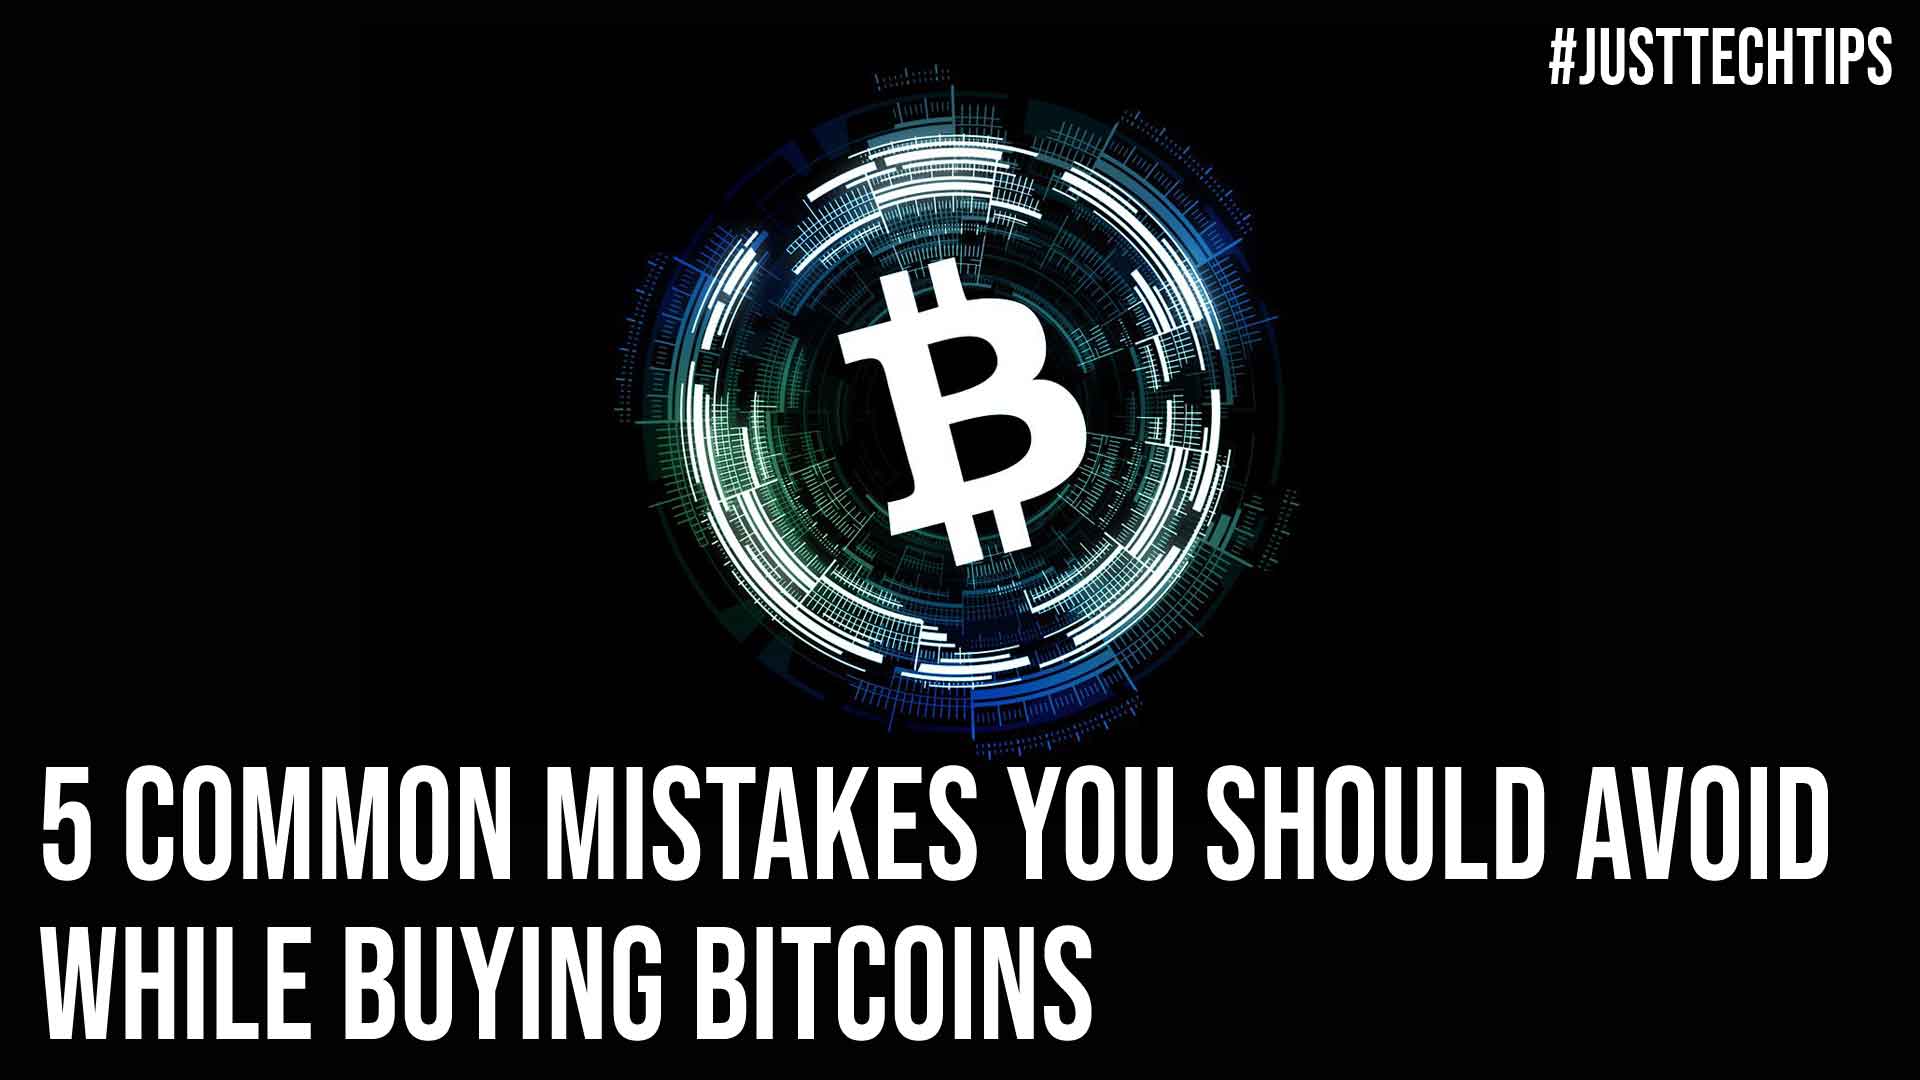 5 Common Mistakes You Should Avoid While Buying Bitcoins